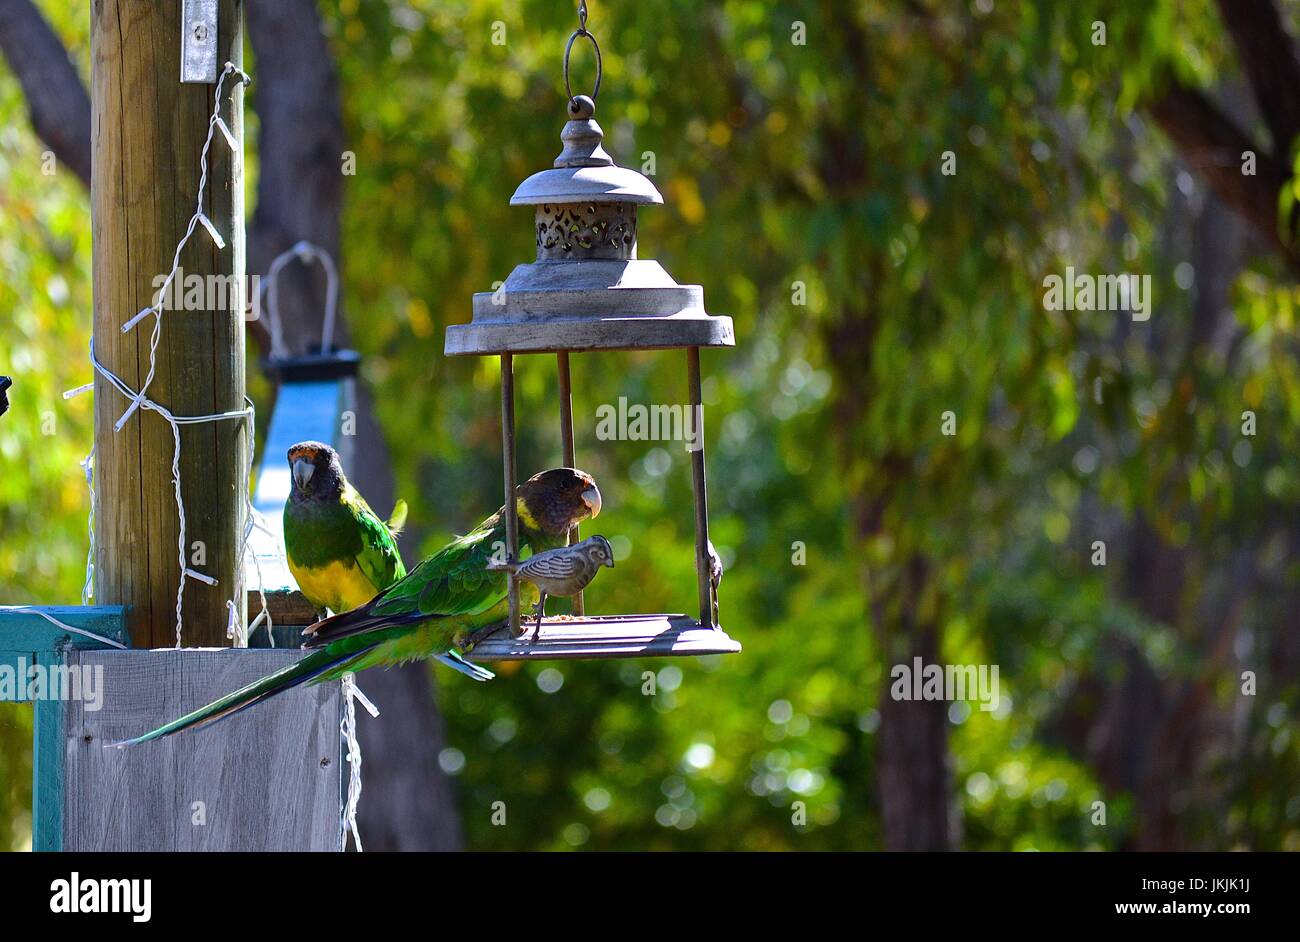 Pair of green parrots at a feeder Stock Photo